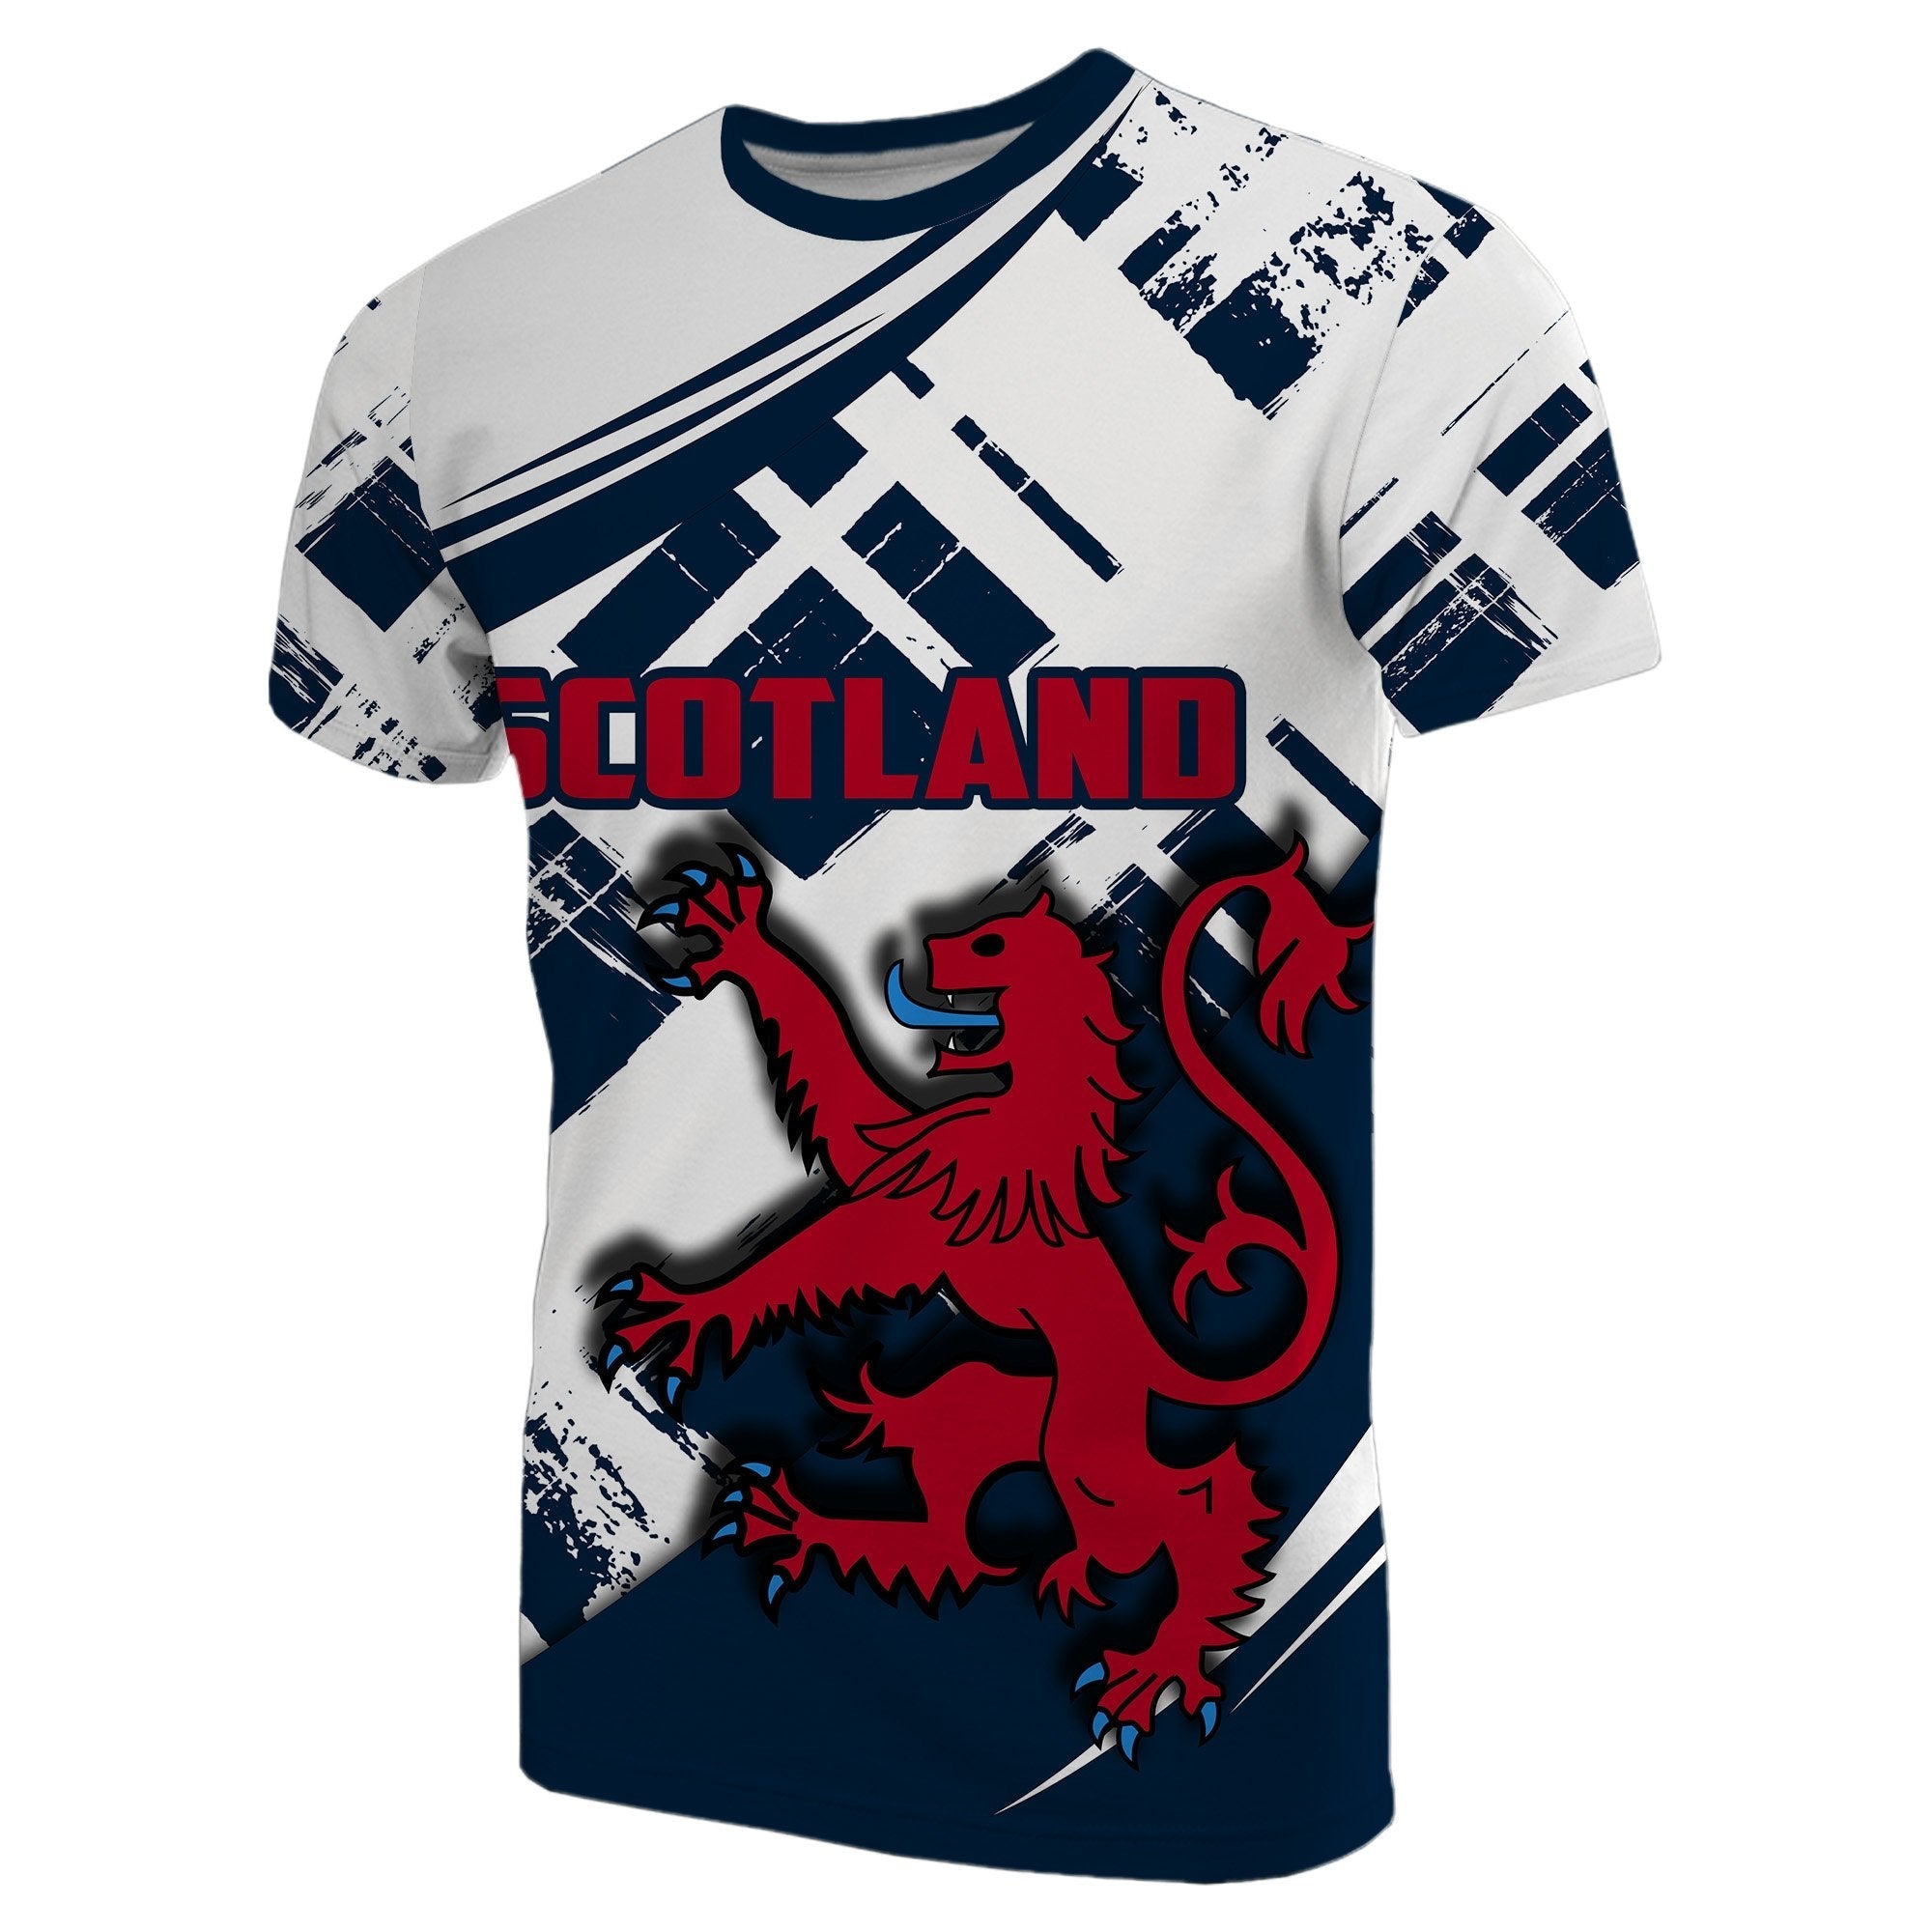 scotland-rugby-t-shirt-the-thistle-lion-rampant-style